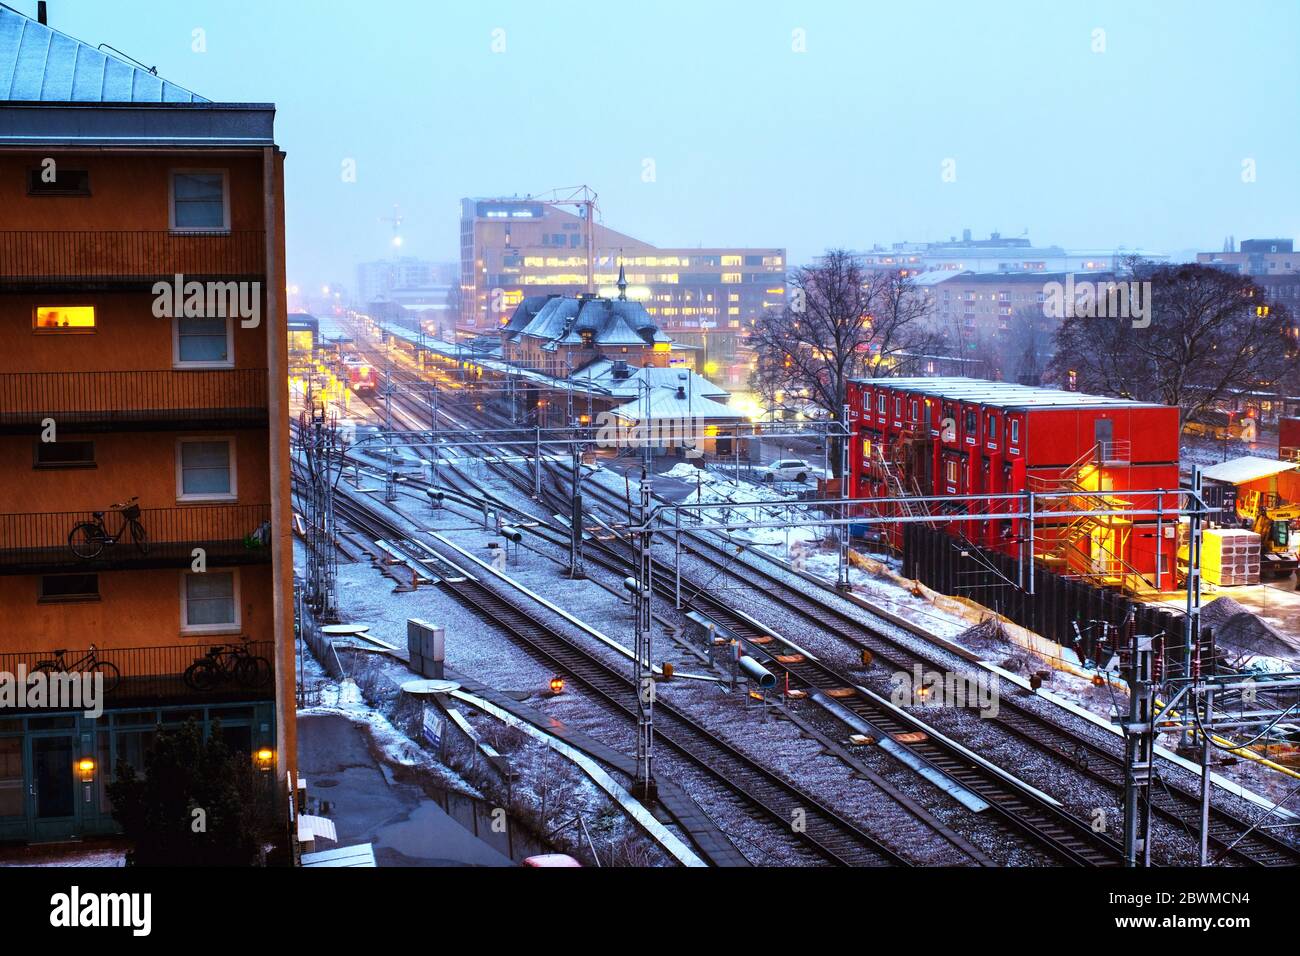 Uppsala, Sweden. Aerial view of railway station in Uppsala, Sweden at sunset. Snowy evening with train traffic and cloudy sky Stock Photo